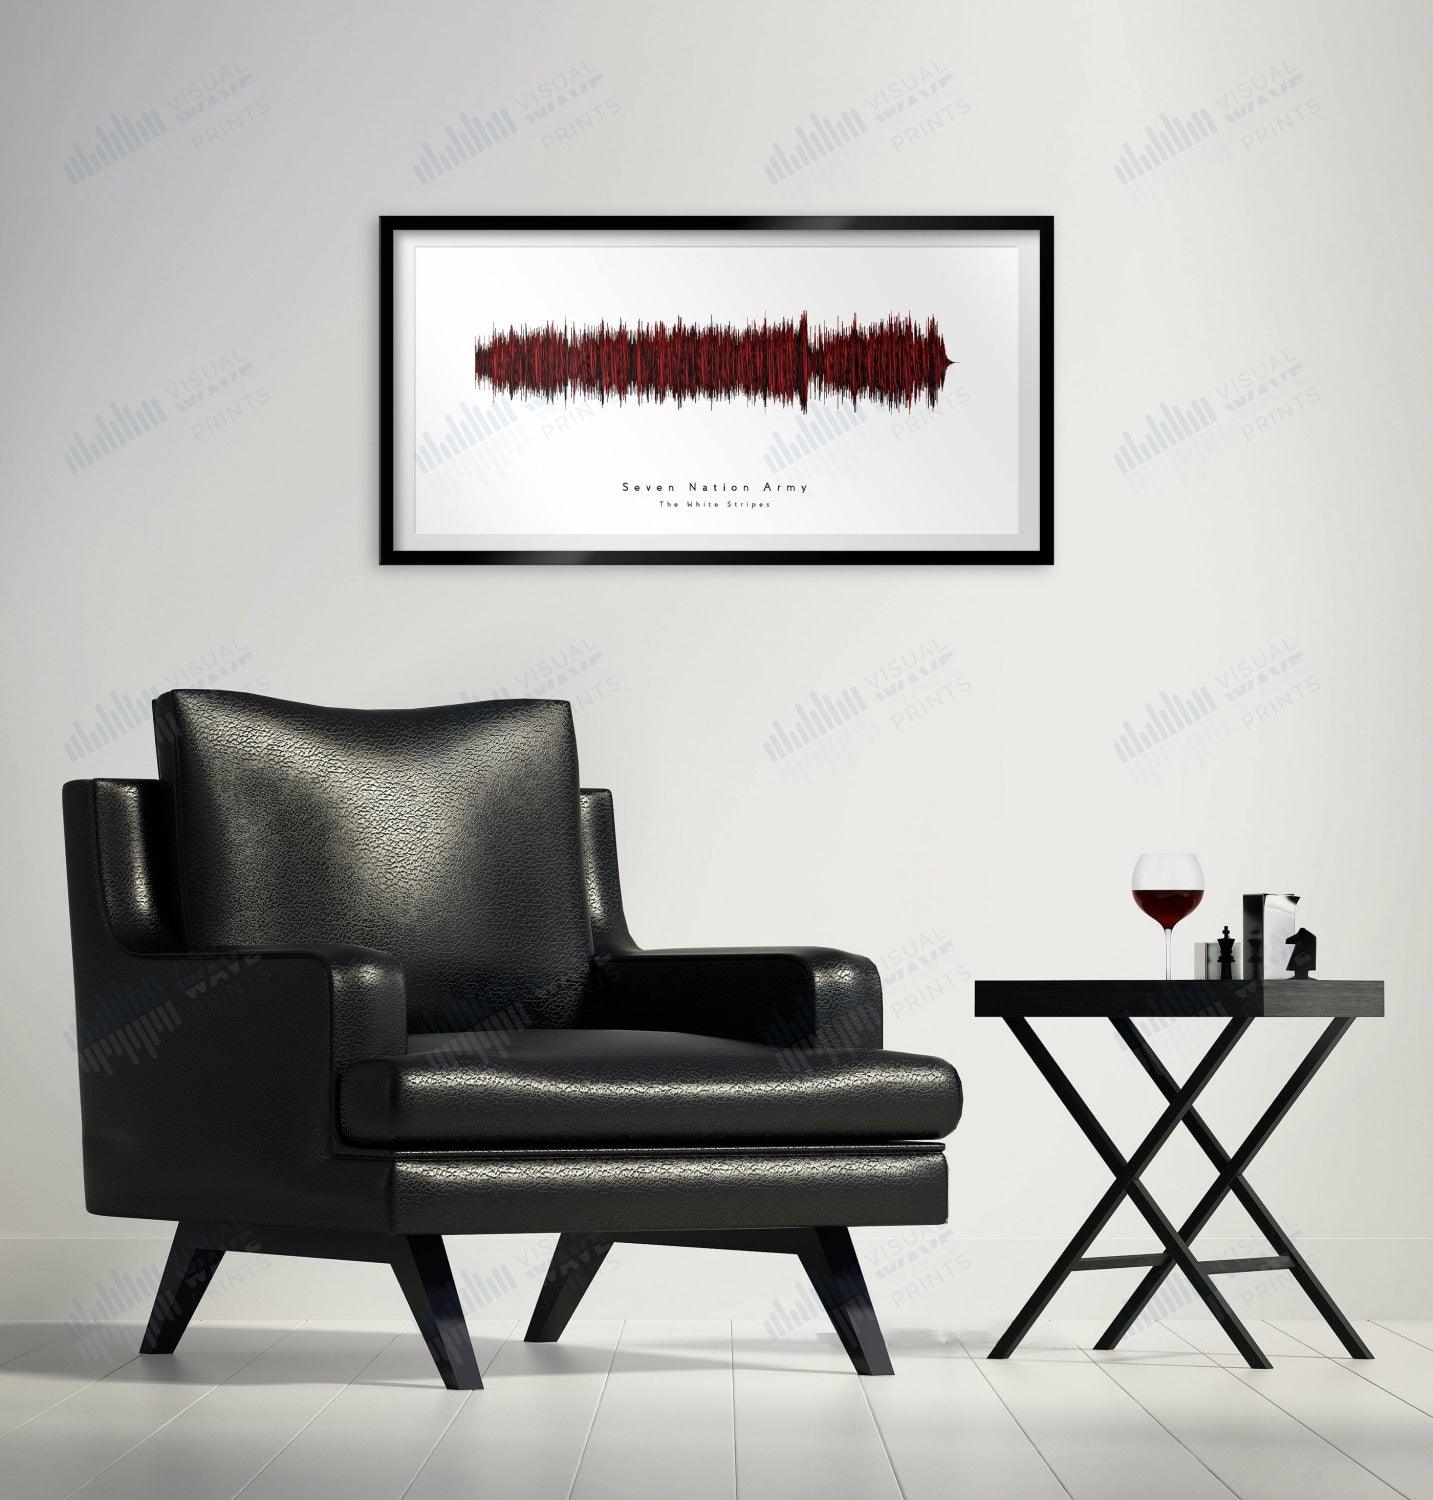 Seven Nation Army by The White Stripes - Visual Wave Prints